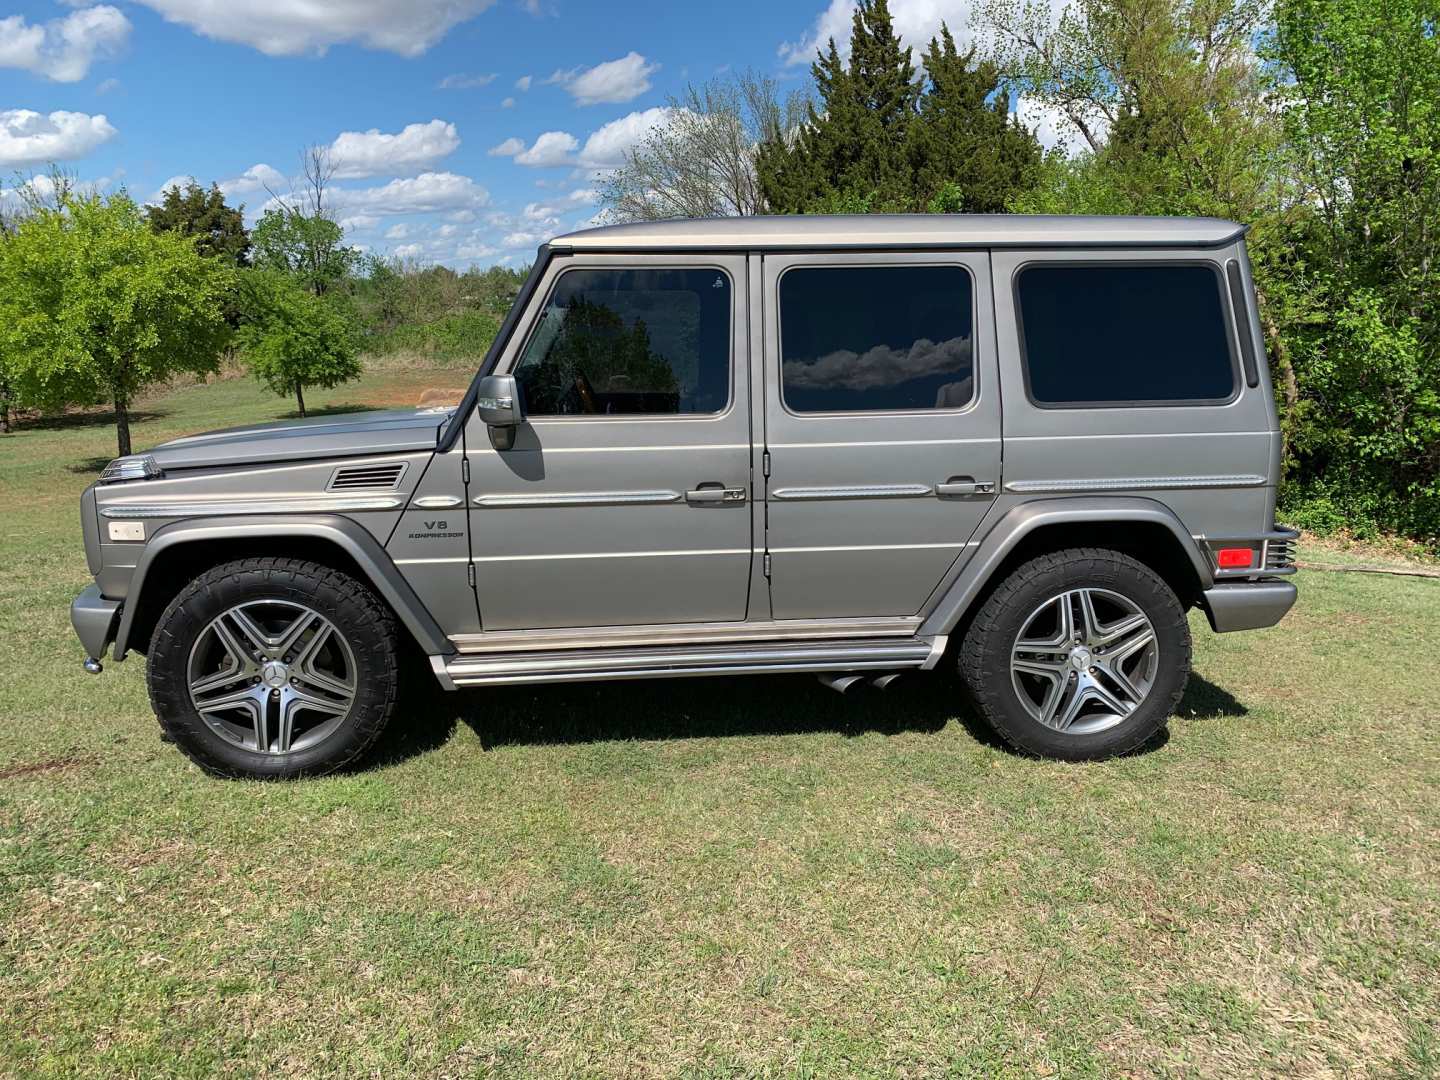 7th Image of a 2005 MERCEDES-BENZ G-CLASS G55 AMG